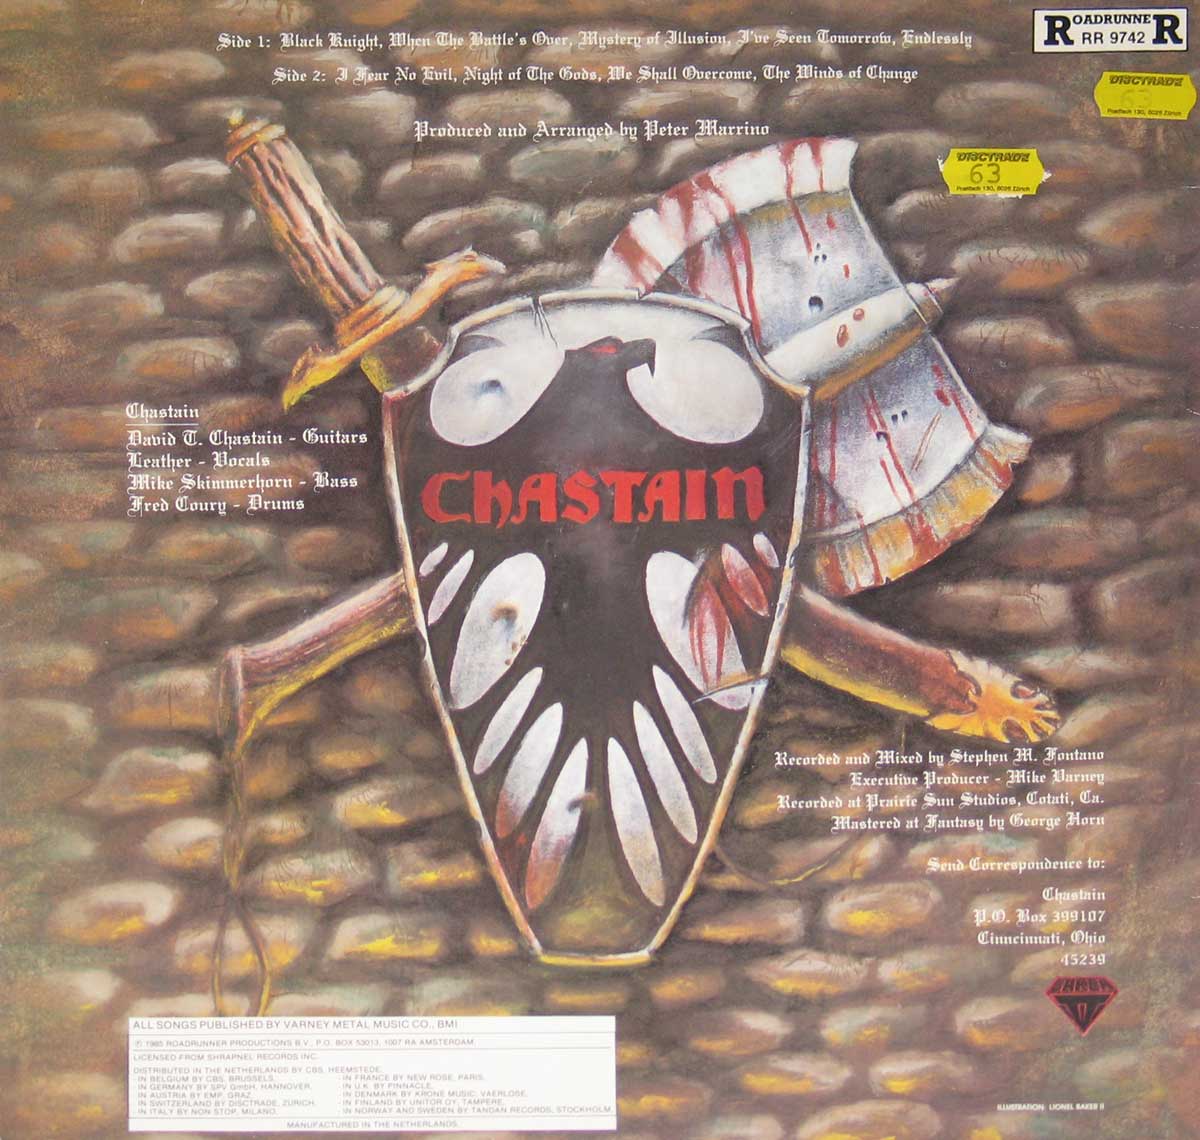 High Resolution Photo Album Back Cover of CHASTAIN - Mystery of Illusion https://vinyl-records.nl